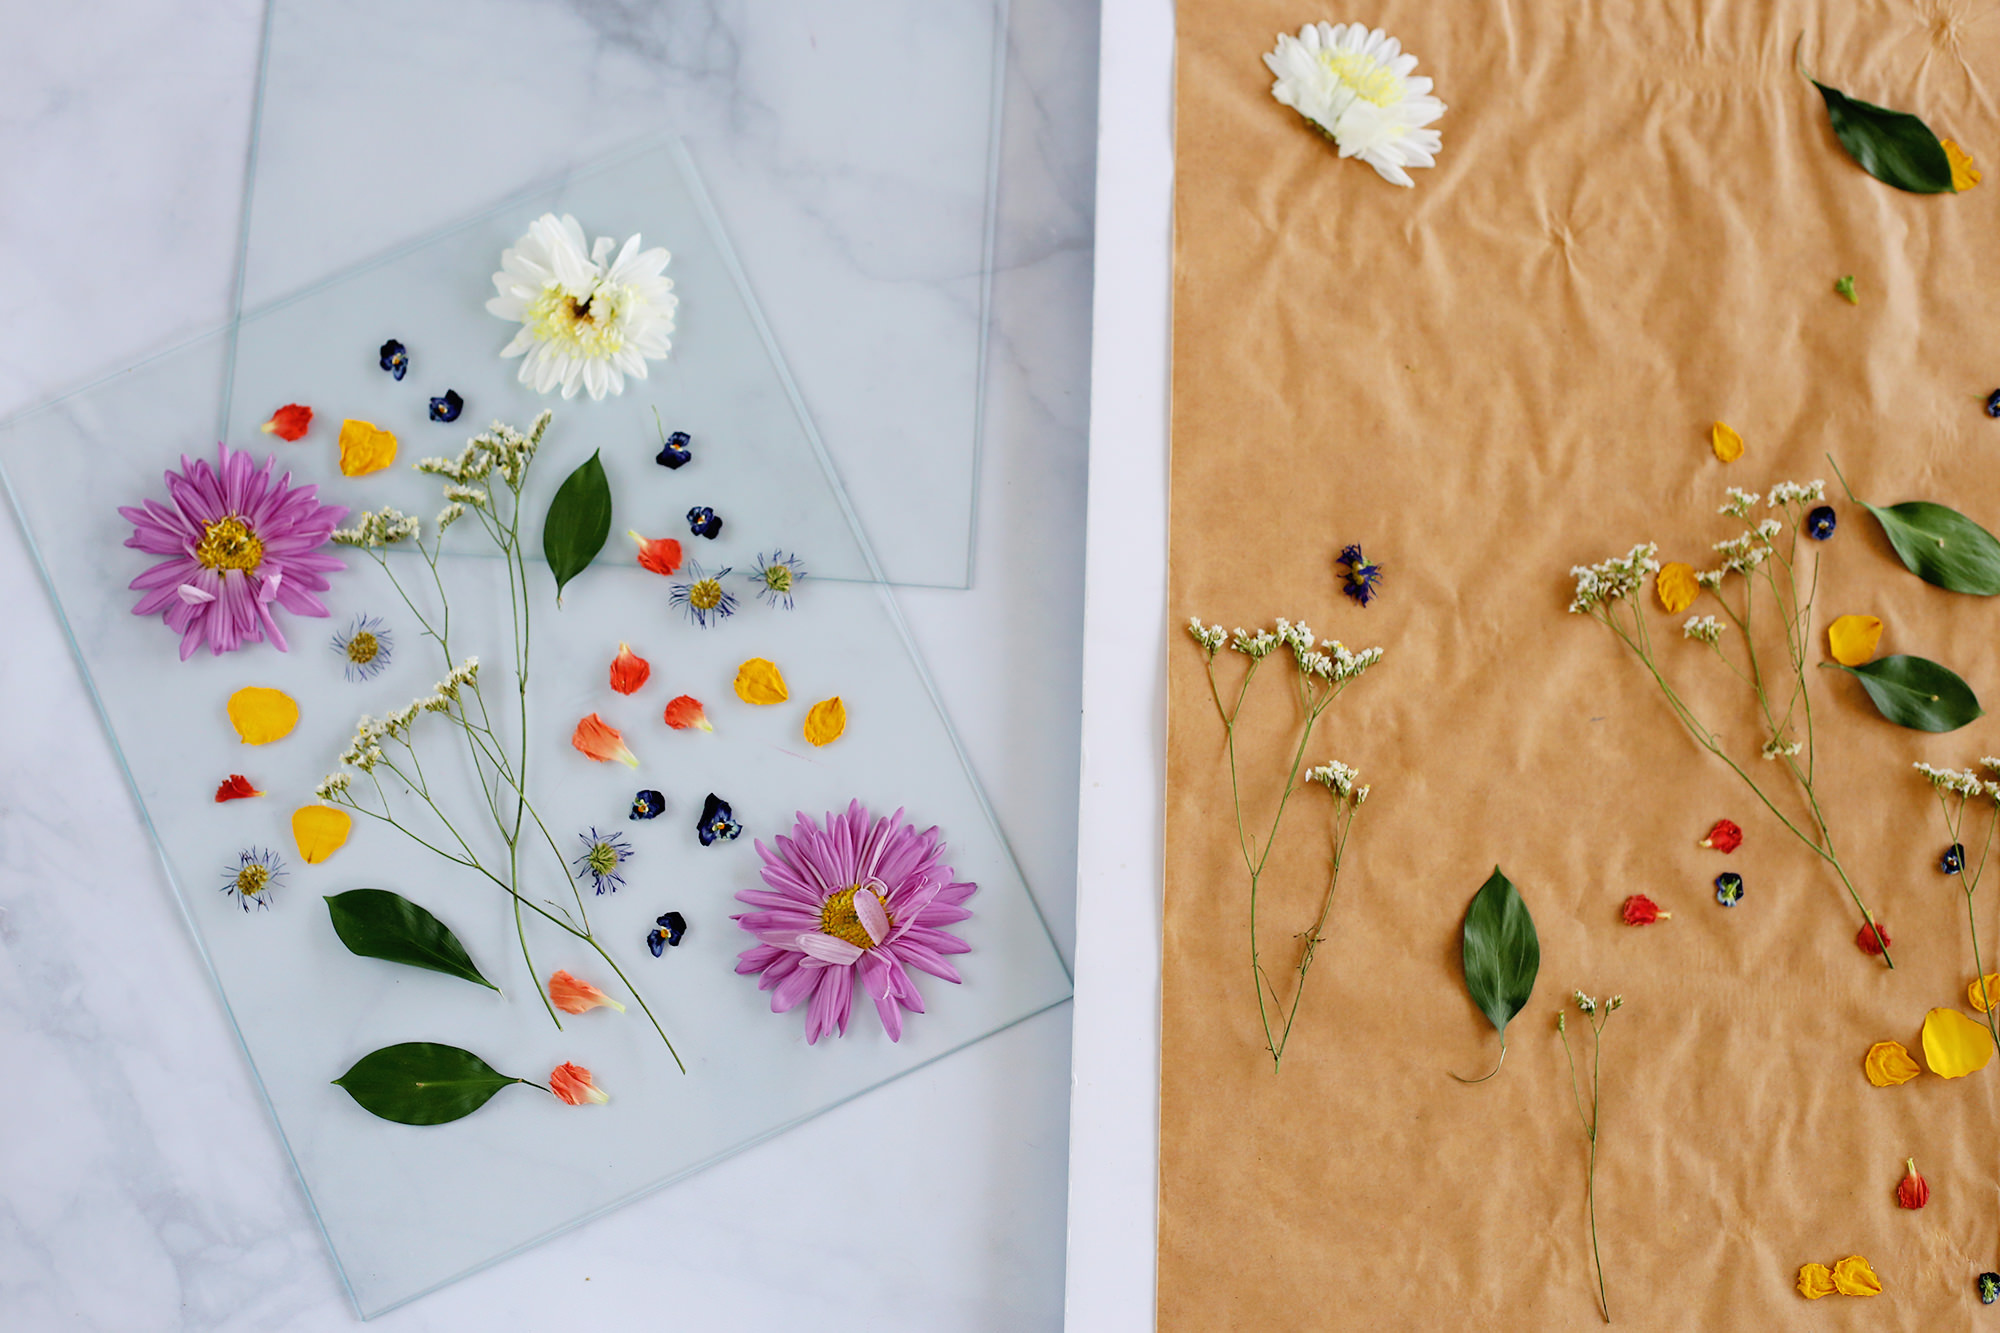 Pressed flowers stay rich in color and don't require any upkeep! Visit Lily & Val Blog to see how we displayed them!